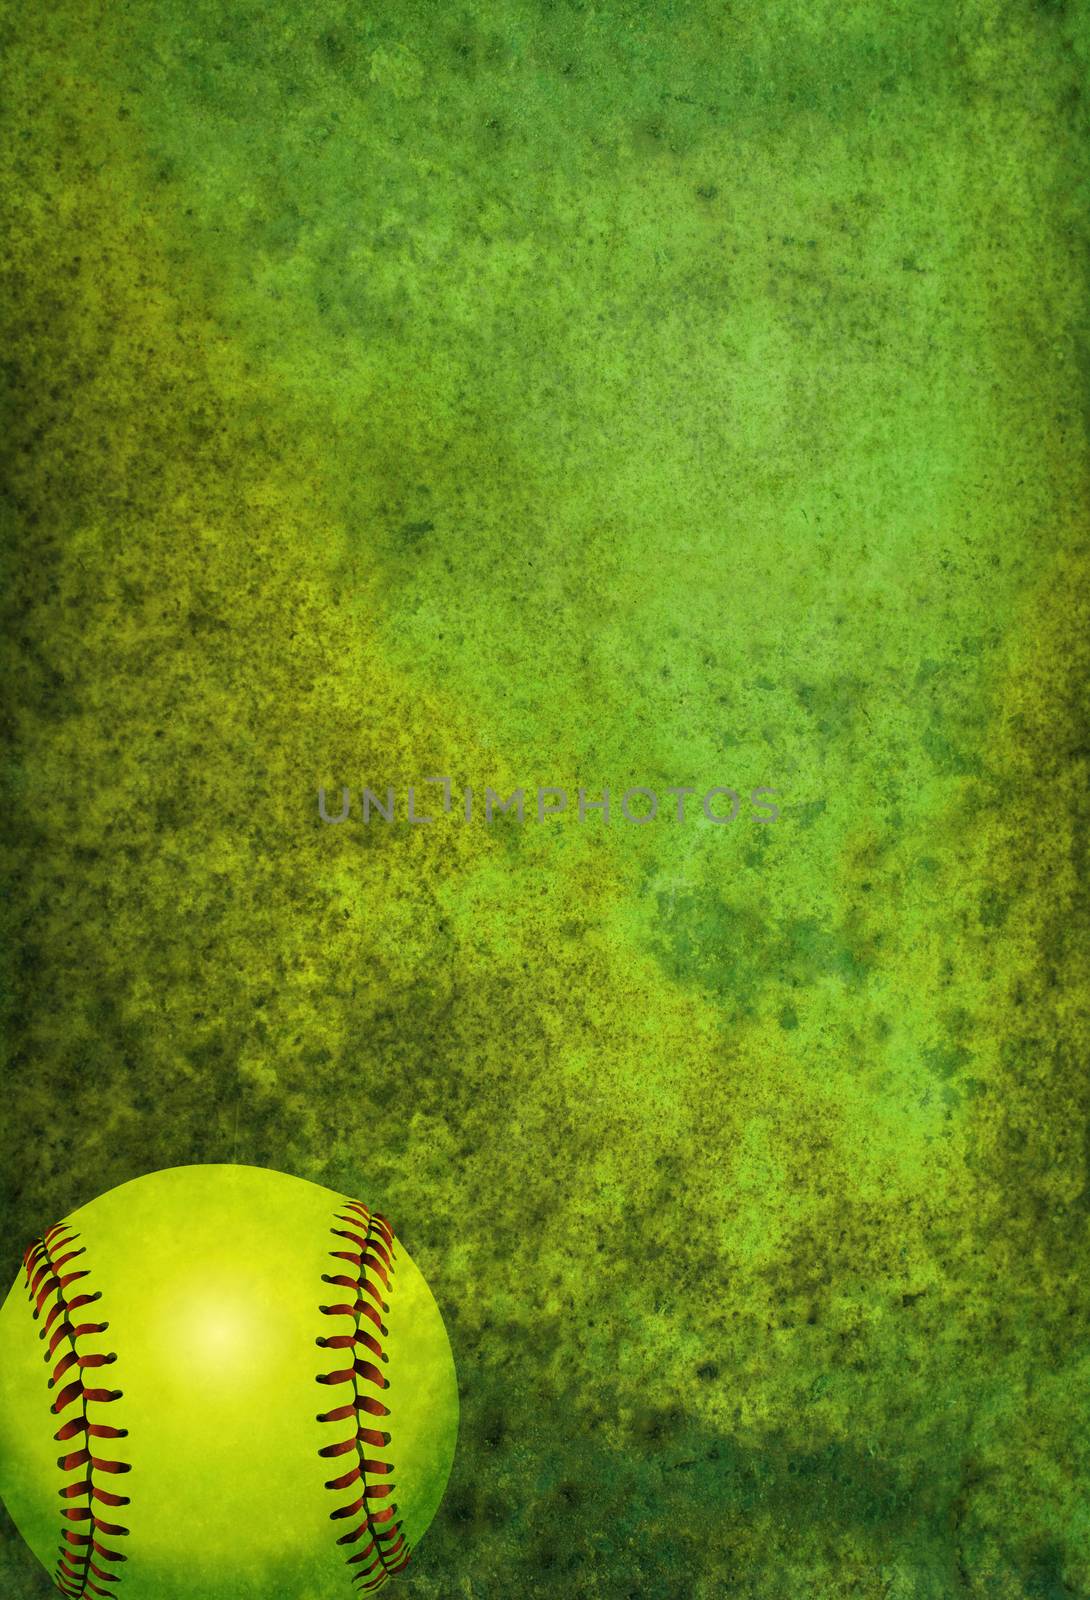 Textured Softball Background with Ball by enterlinedesign